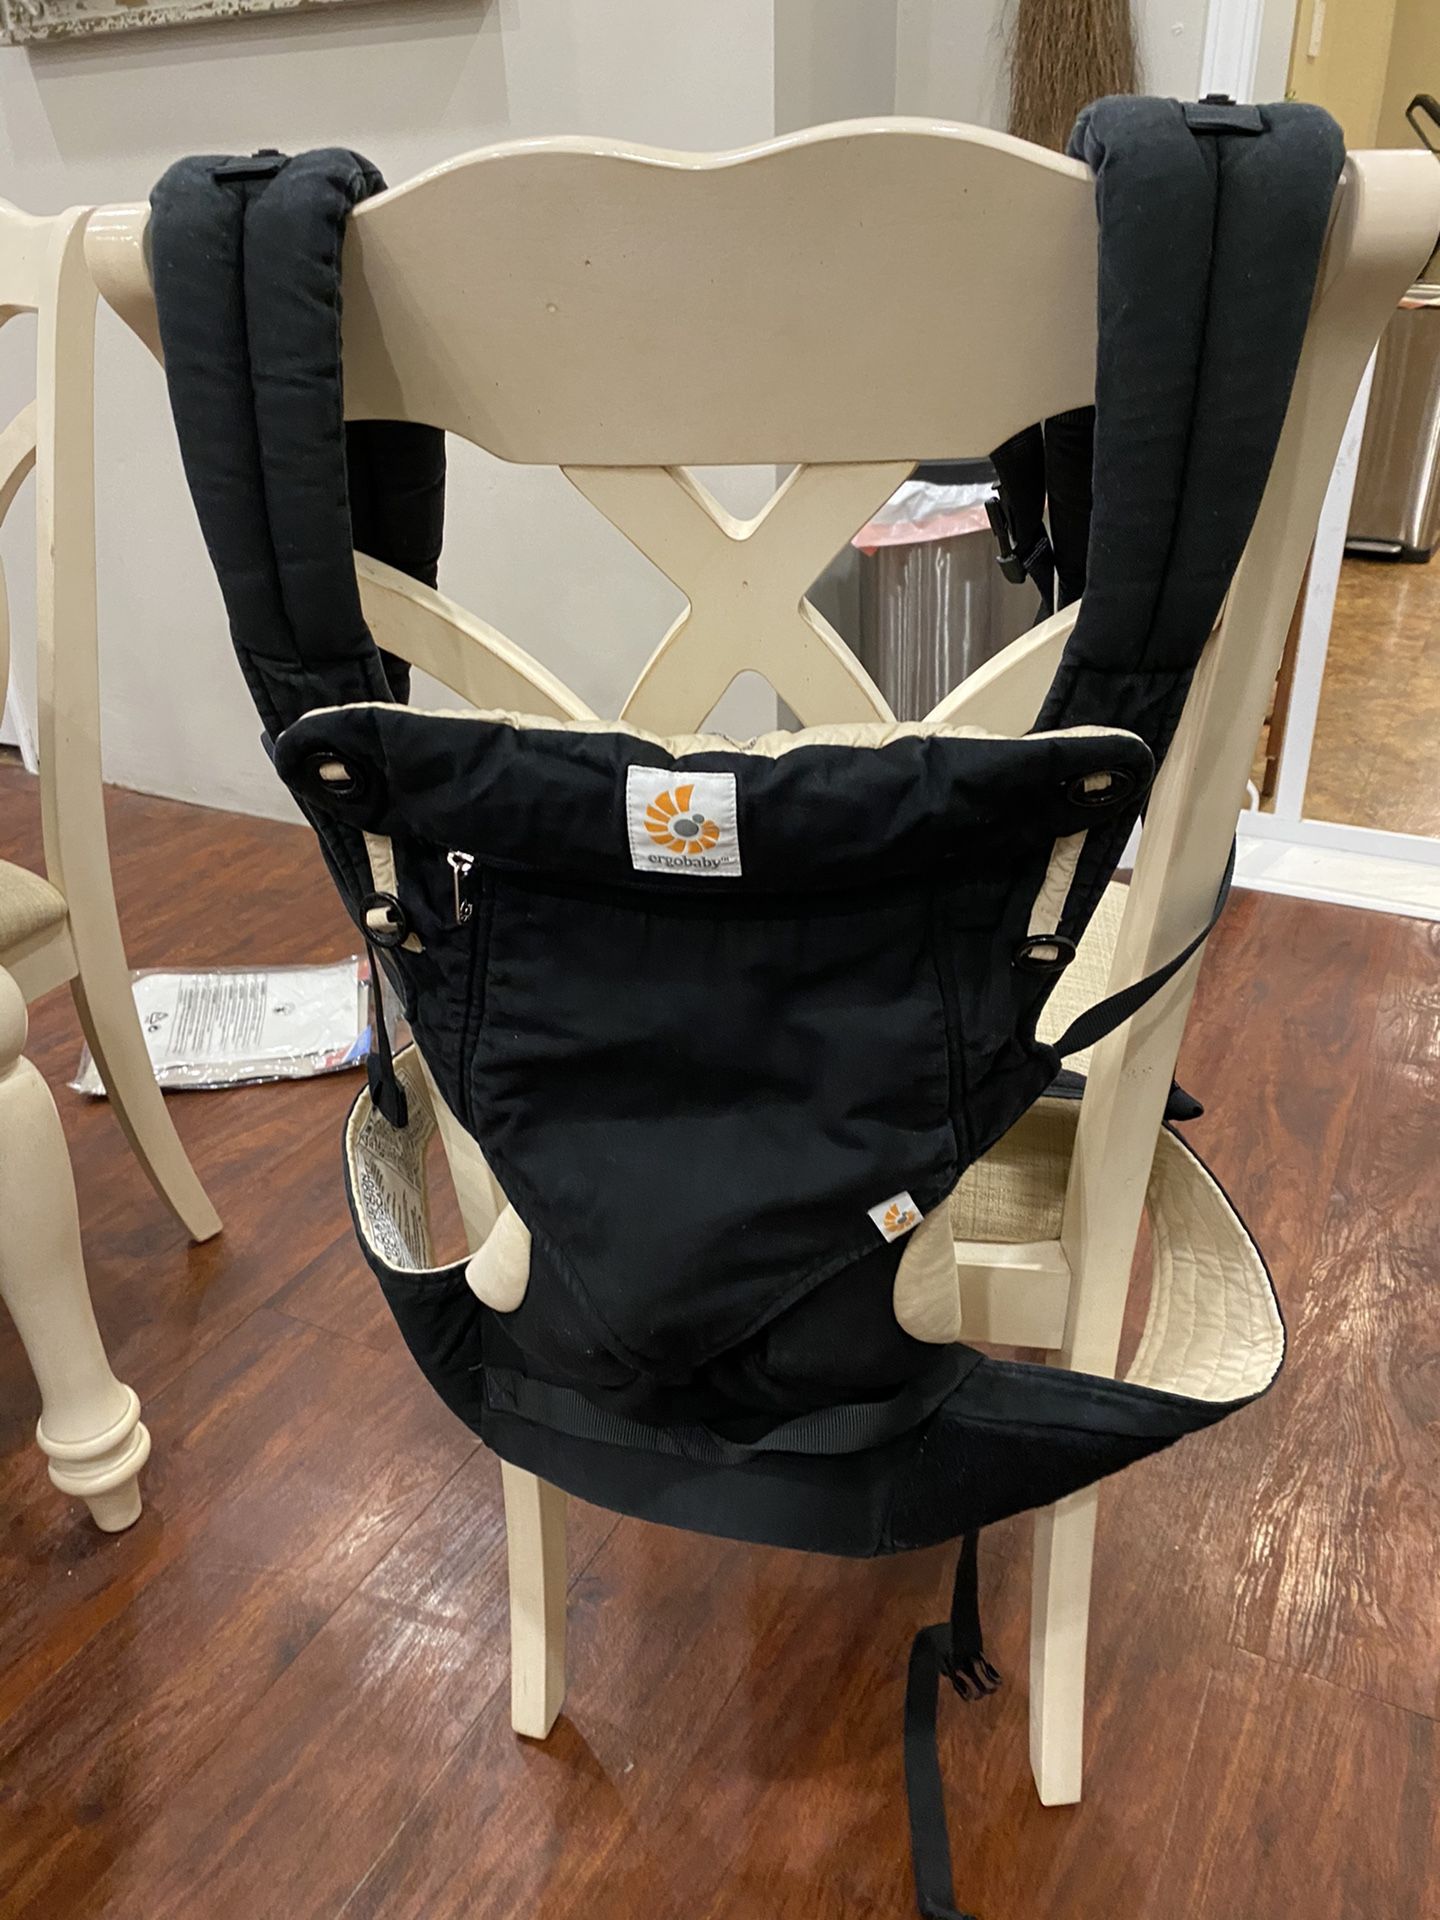 Ergo Baby 360 Position Baby Carrier and other baby items